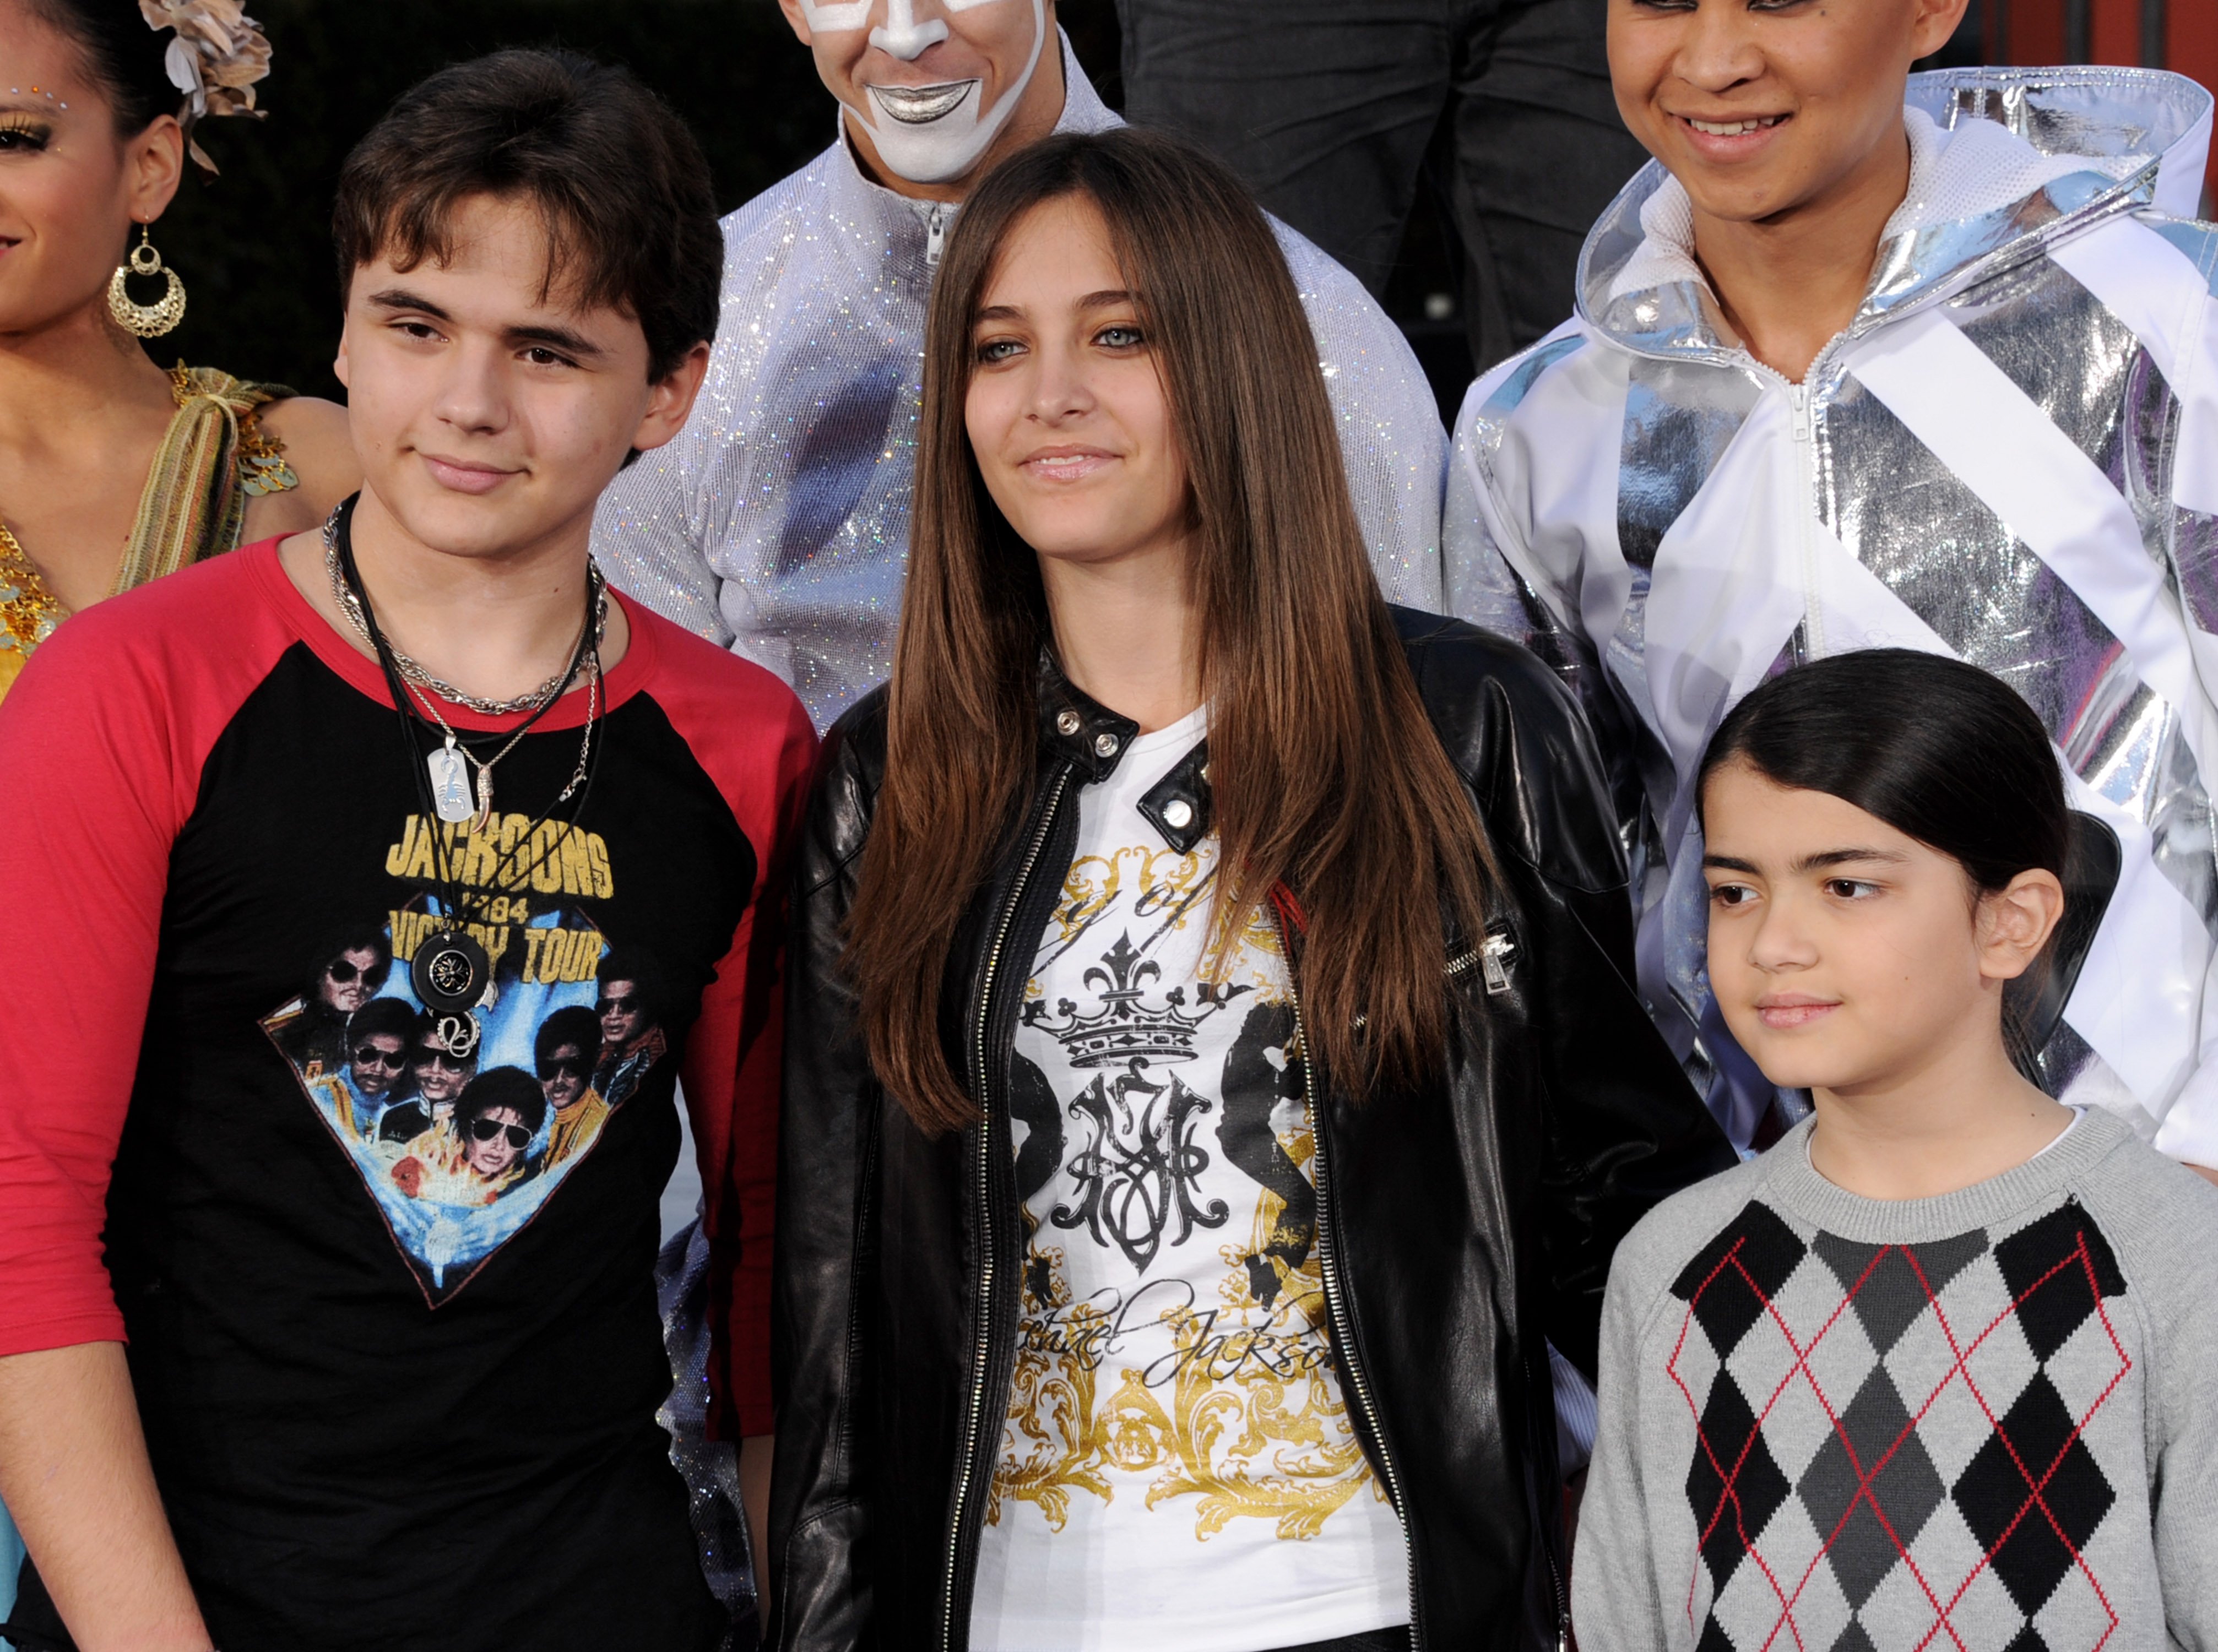 Michael Jackson's children, Prince, Paris and Blanket attending their father's Hand and Footprint ceremony at Grauman's Chinese Theatre in Los Angeles in January 2012. | Photo: Getty Images